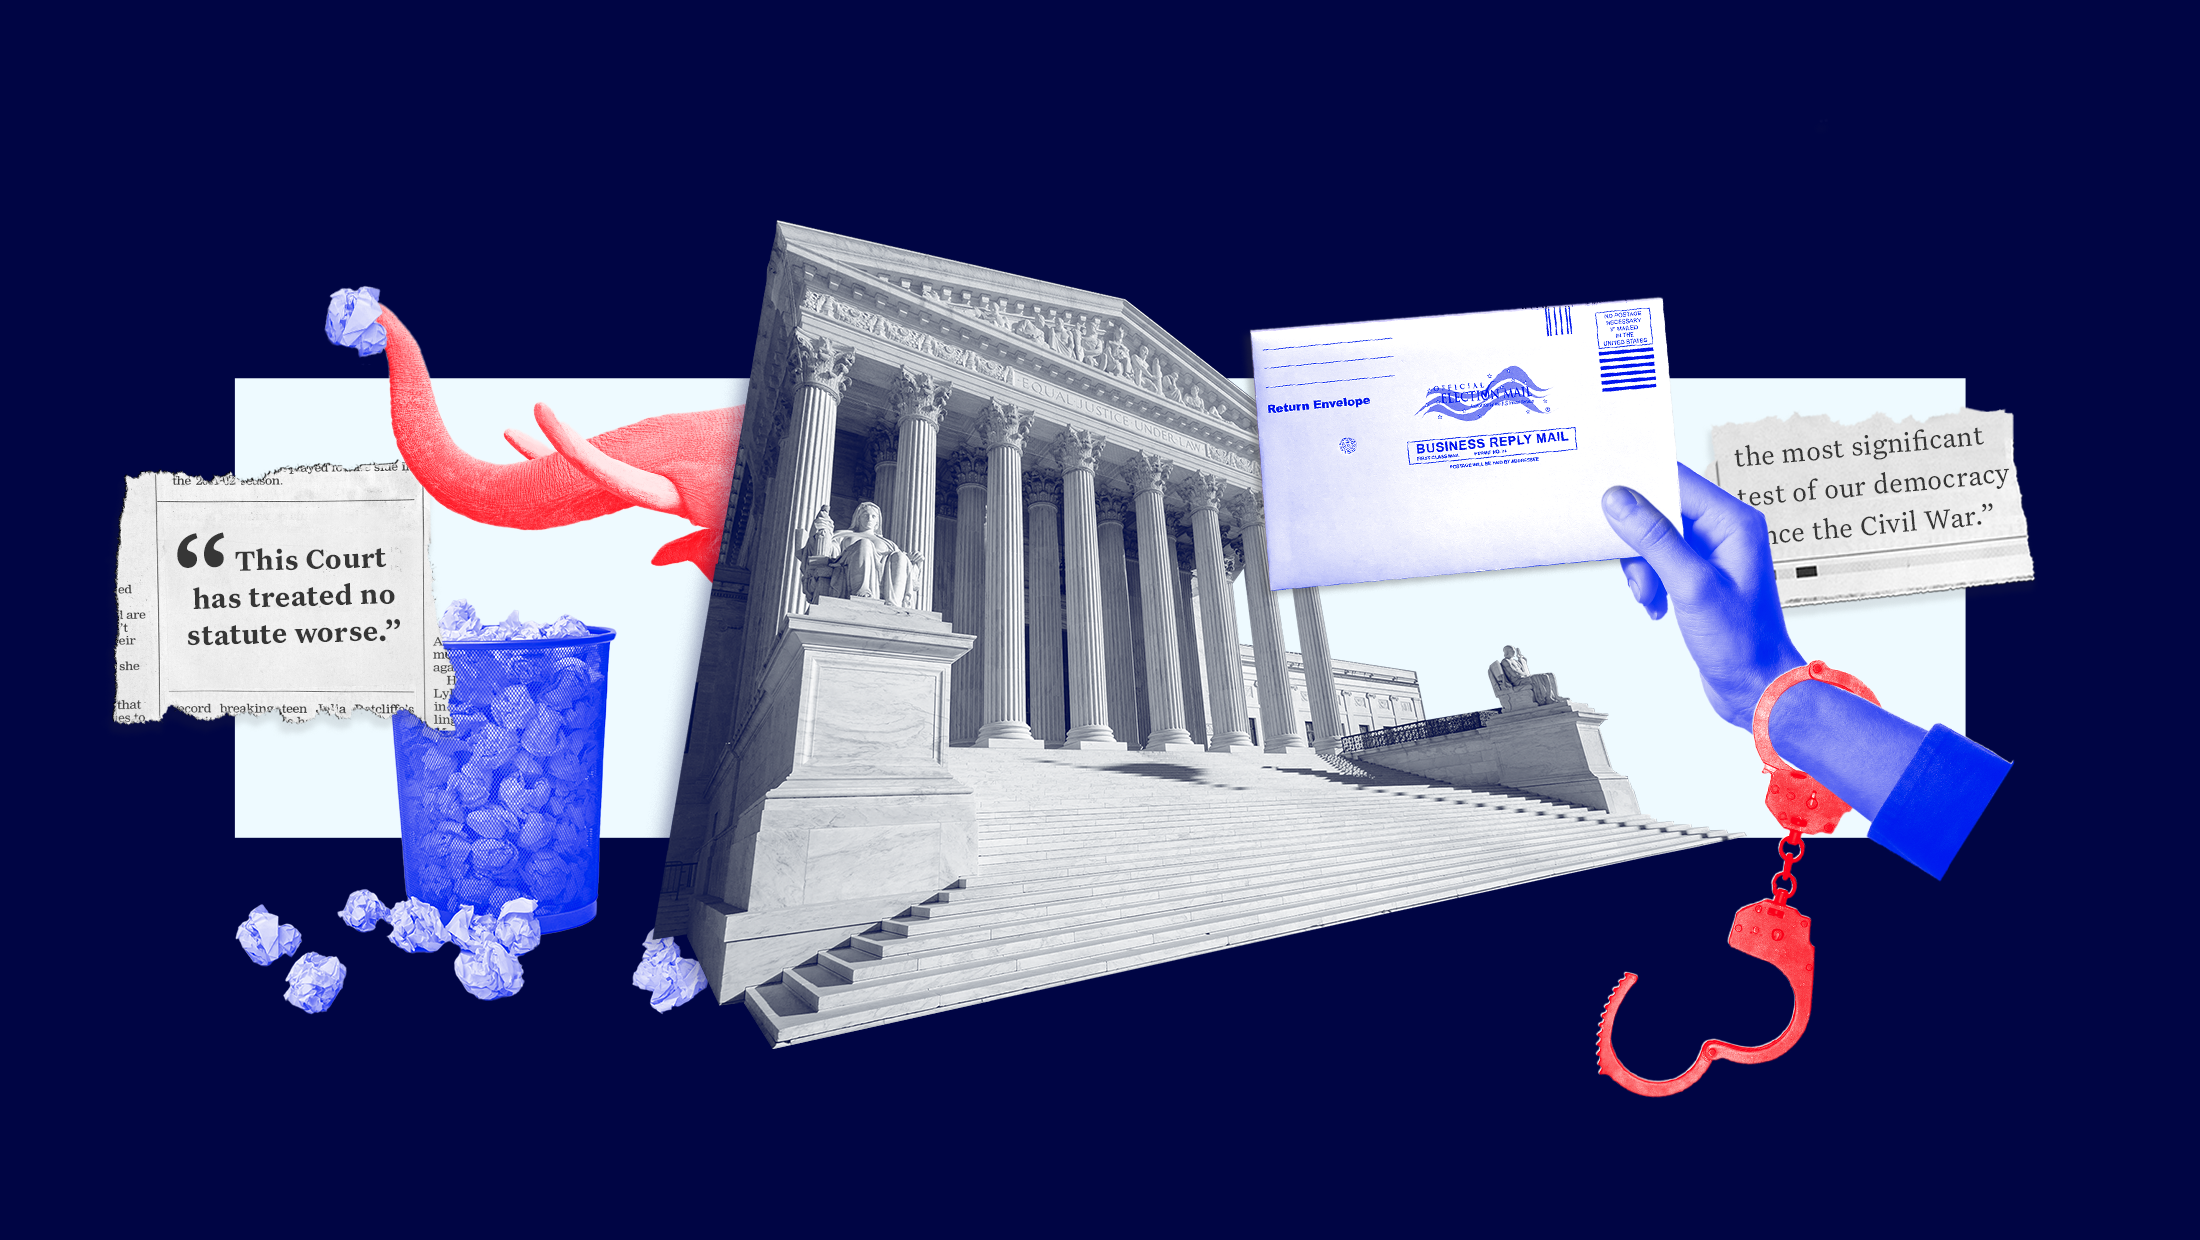 U.S. Supreme Court building flanked by a blue hand-cuffed hand holding a mail ballot, newspaper clippings that say "the most significant test of our democracy since the Civil War" and "This Court has treated no statute worse", and a red elephant holding crumpled blue paper in its trunk hovering over an overflowing garbage can